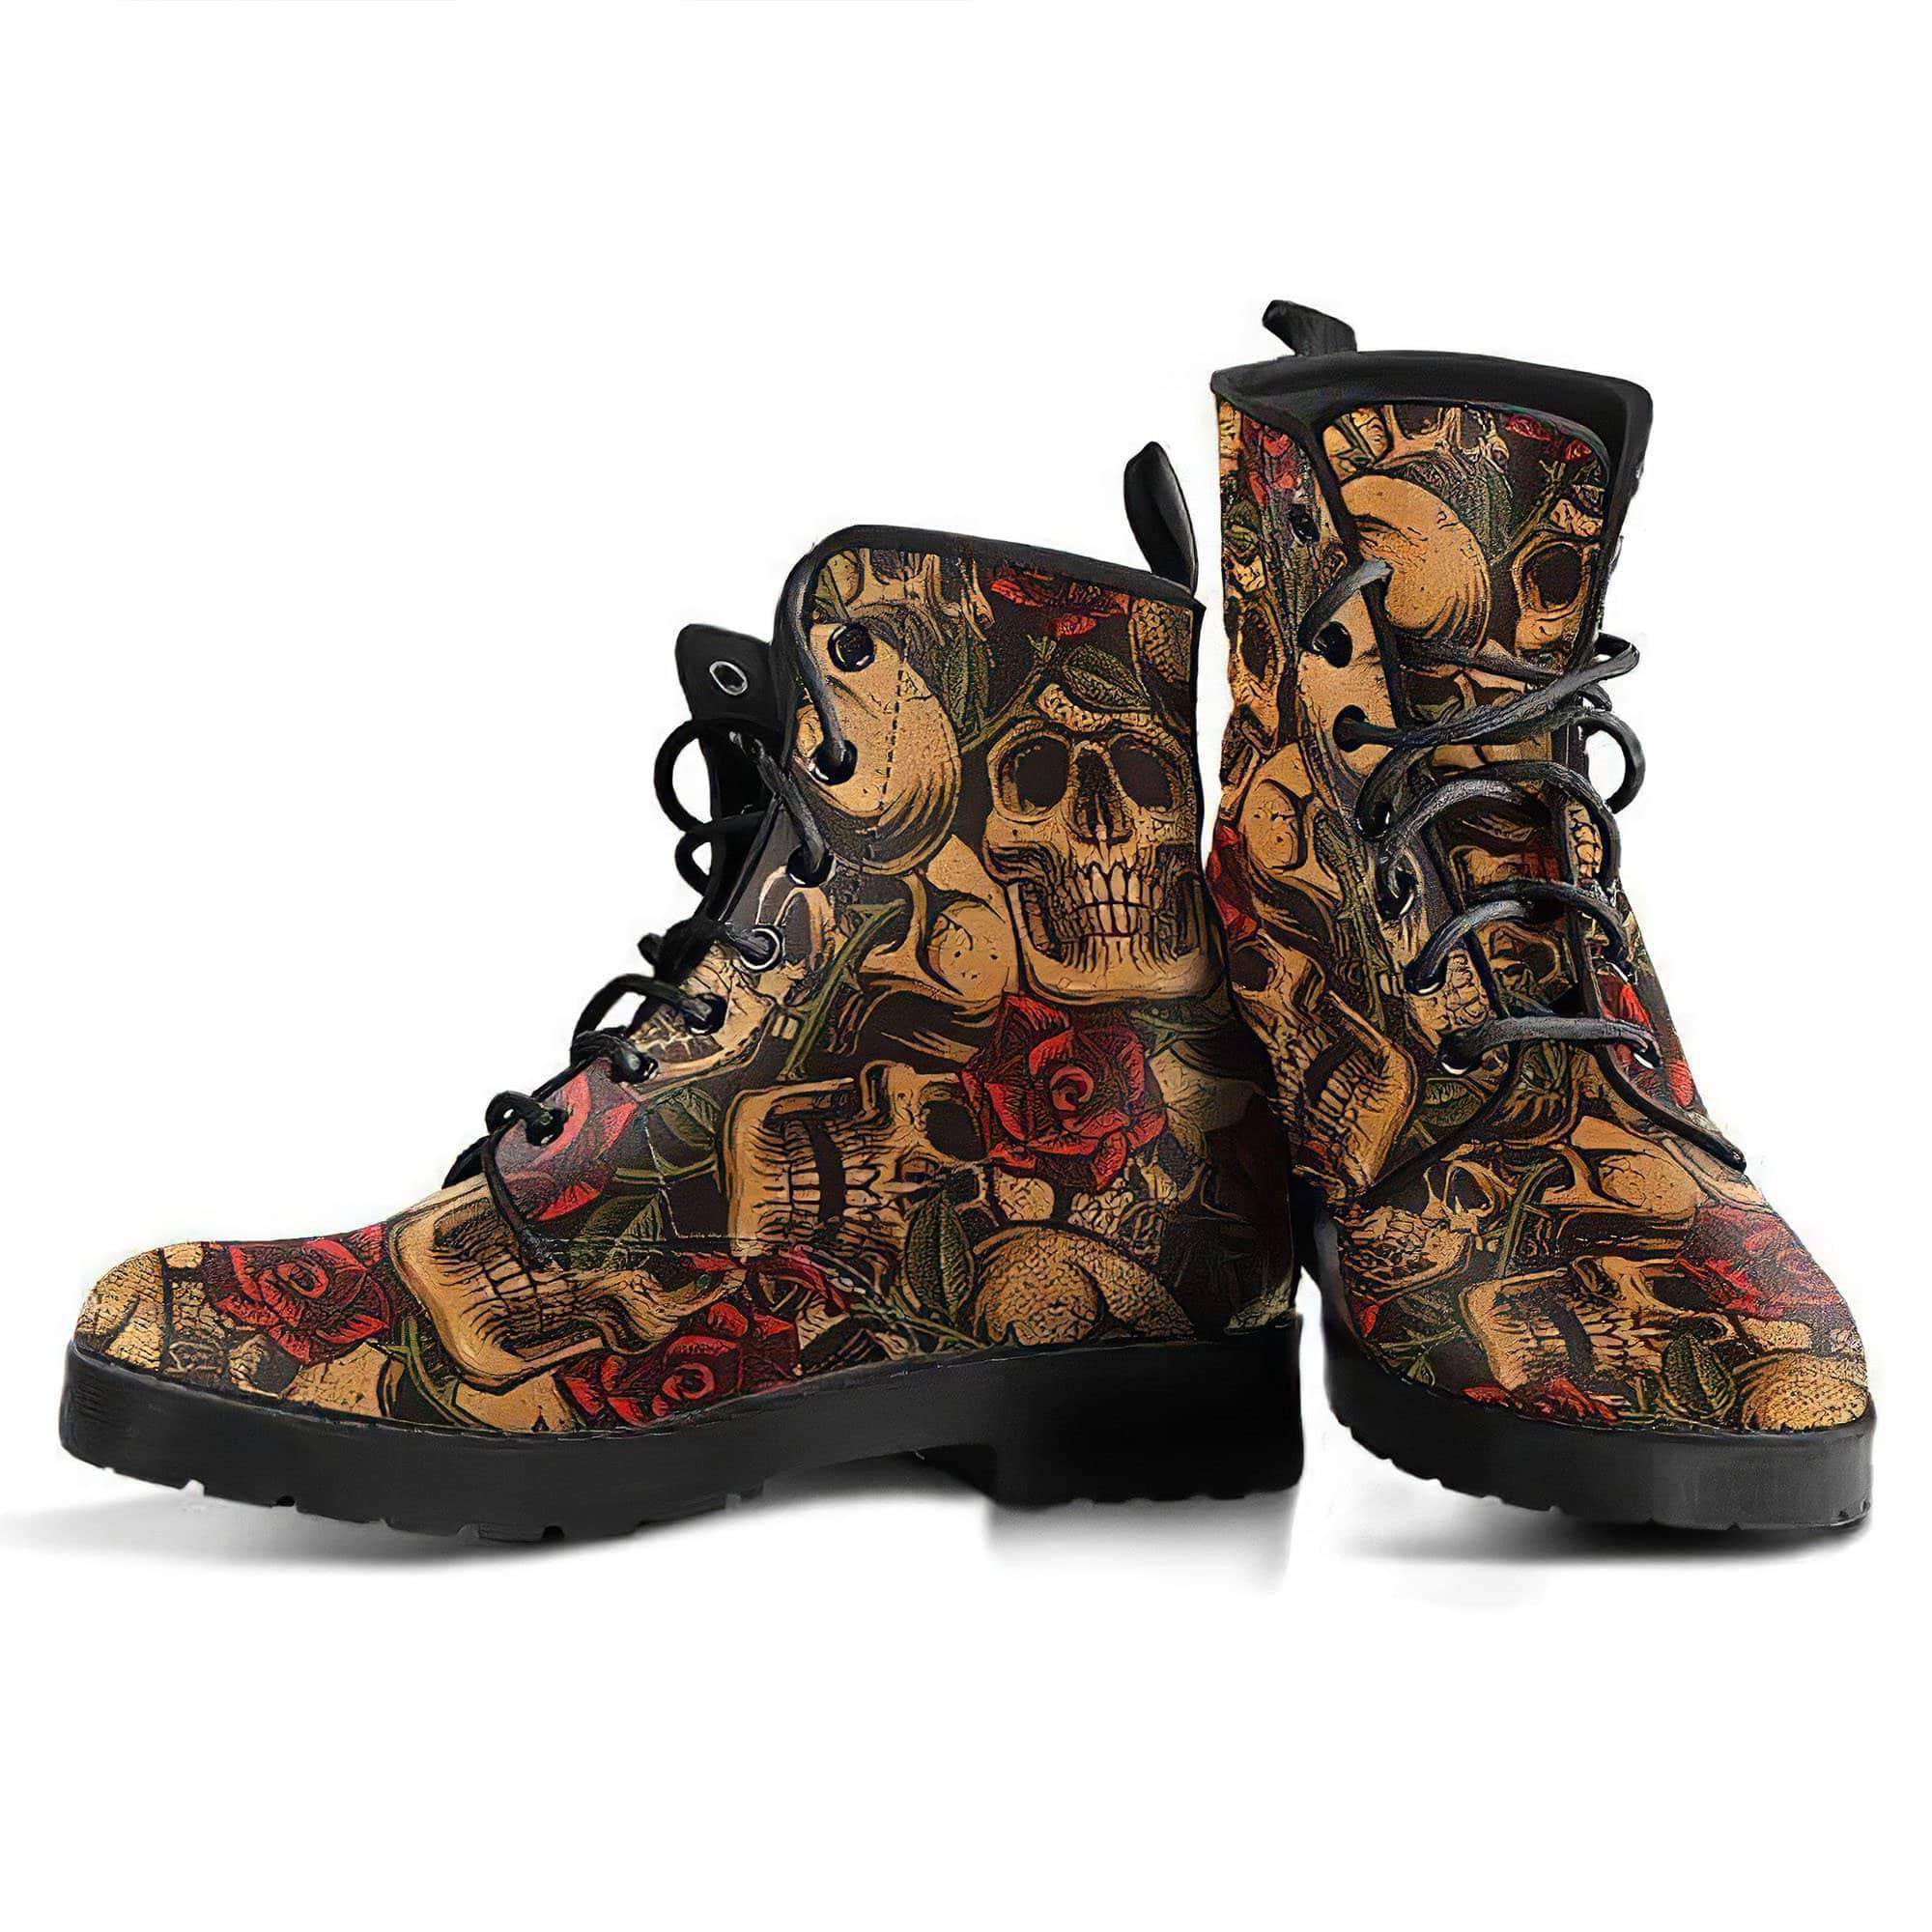 skull-5-handcrafted-boots-women-s-leather-boots-12051948109885.jpg